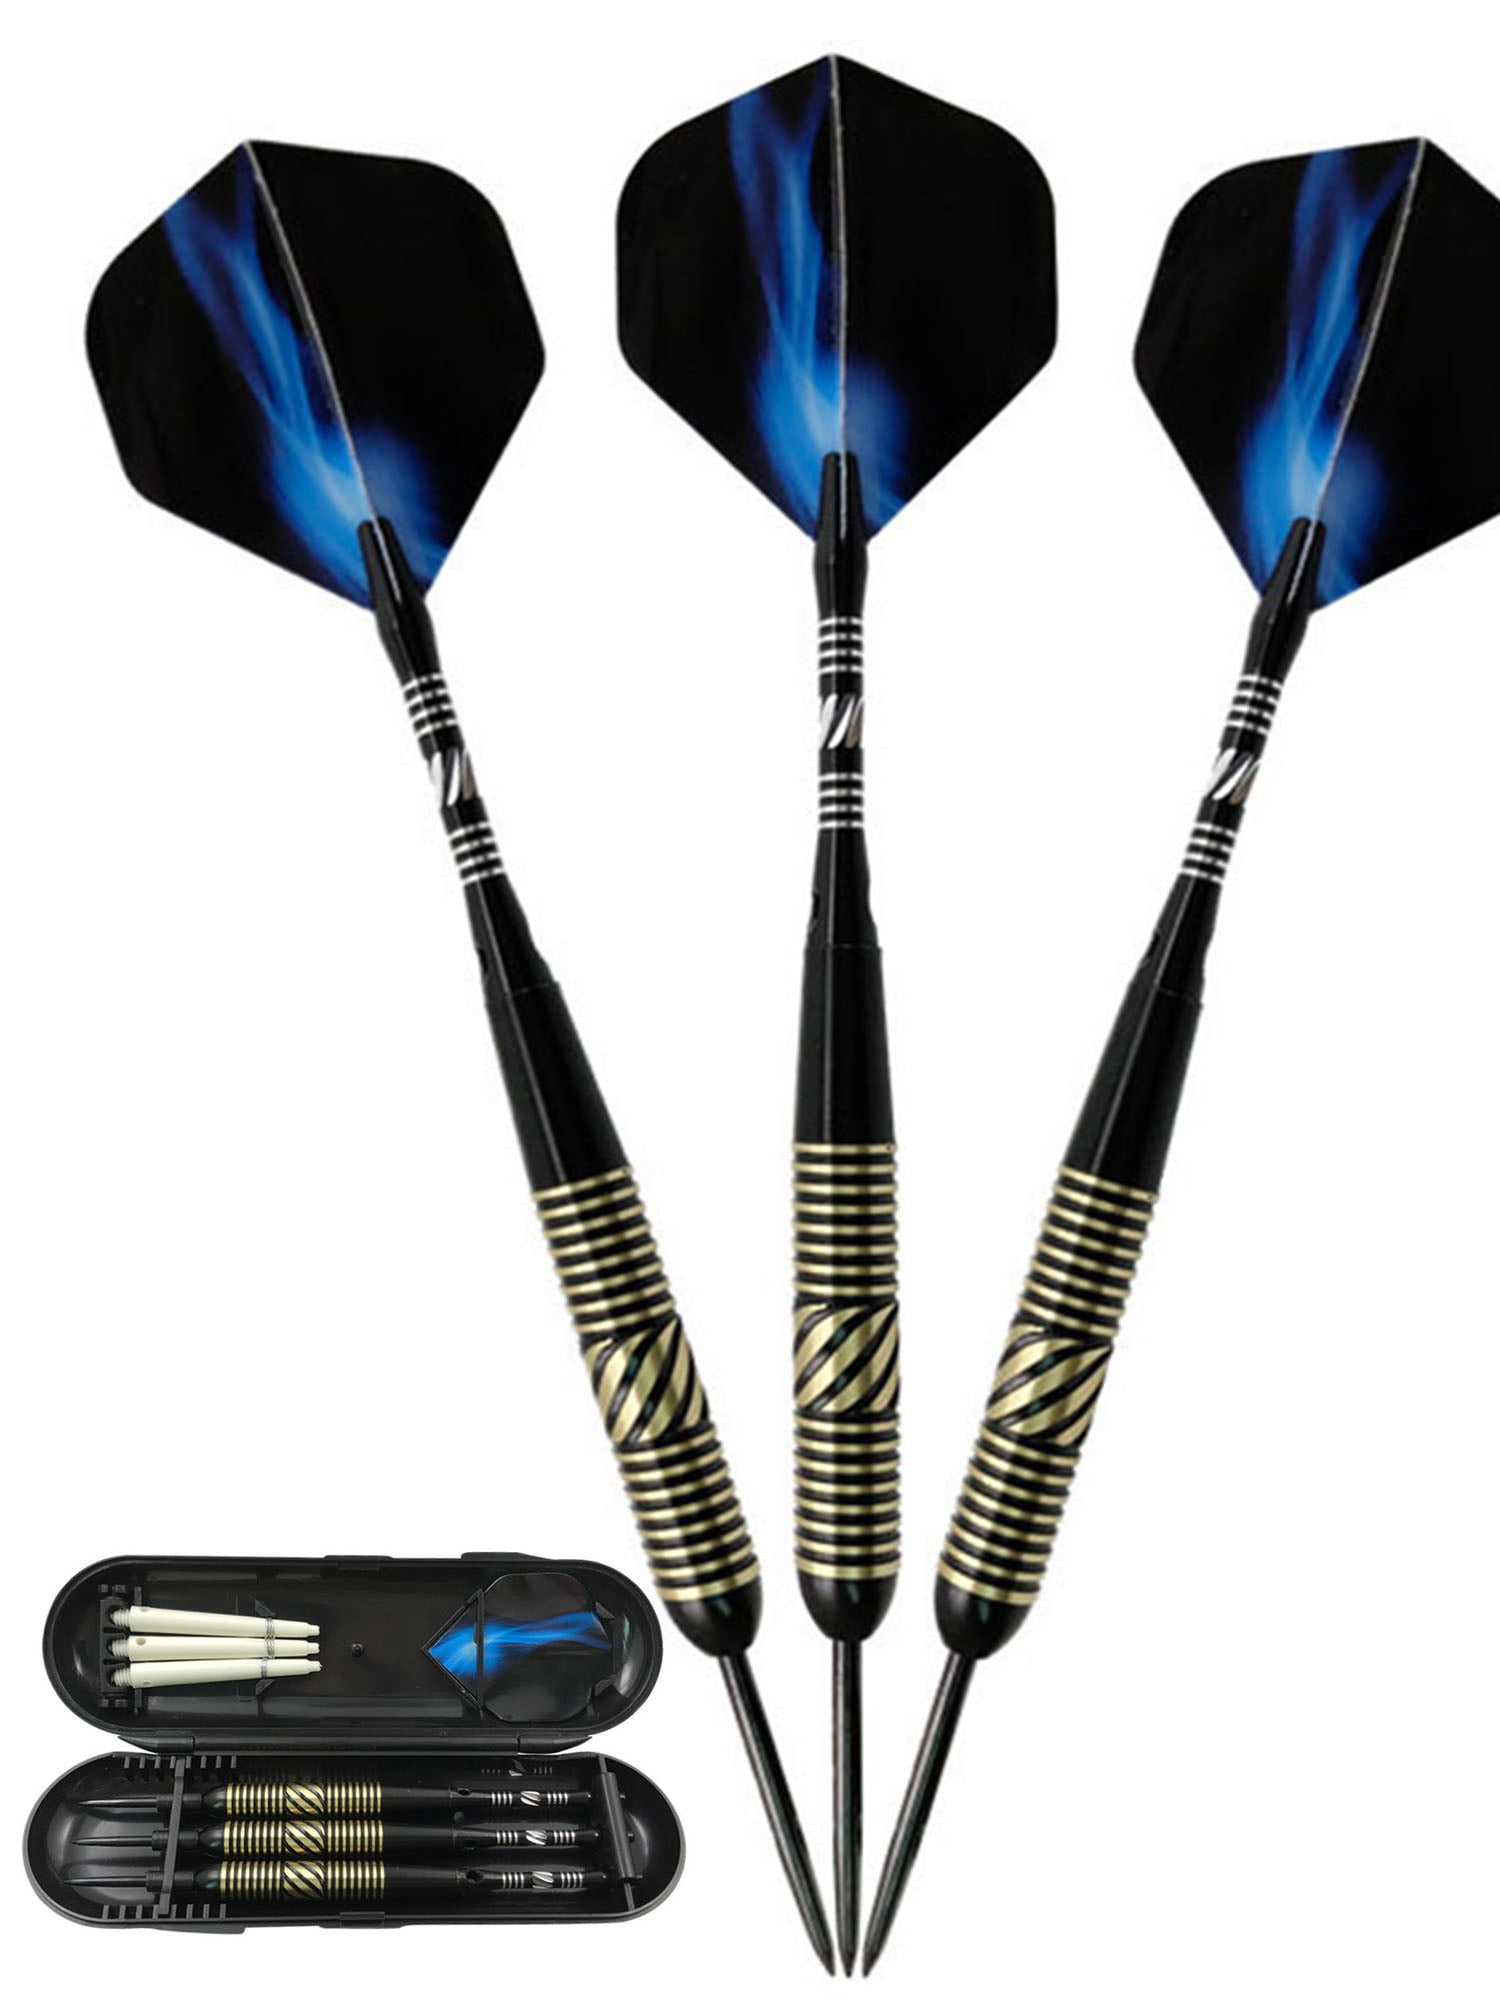 23g Profession Competition Tungsten Steel Needle Tip 3Pcs Darts Set Box DURABLE 